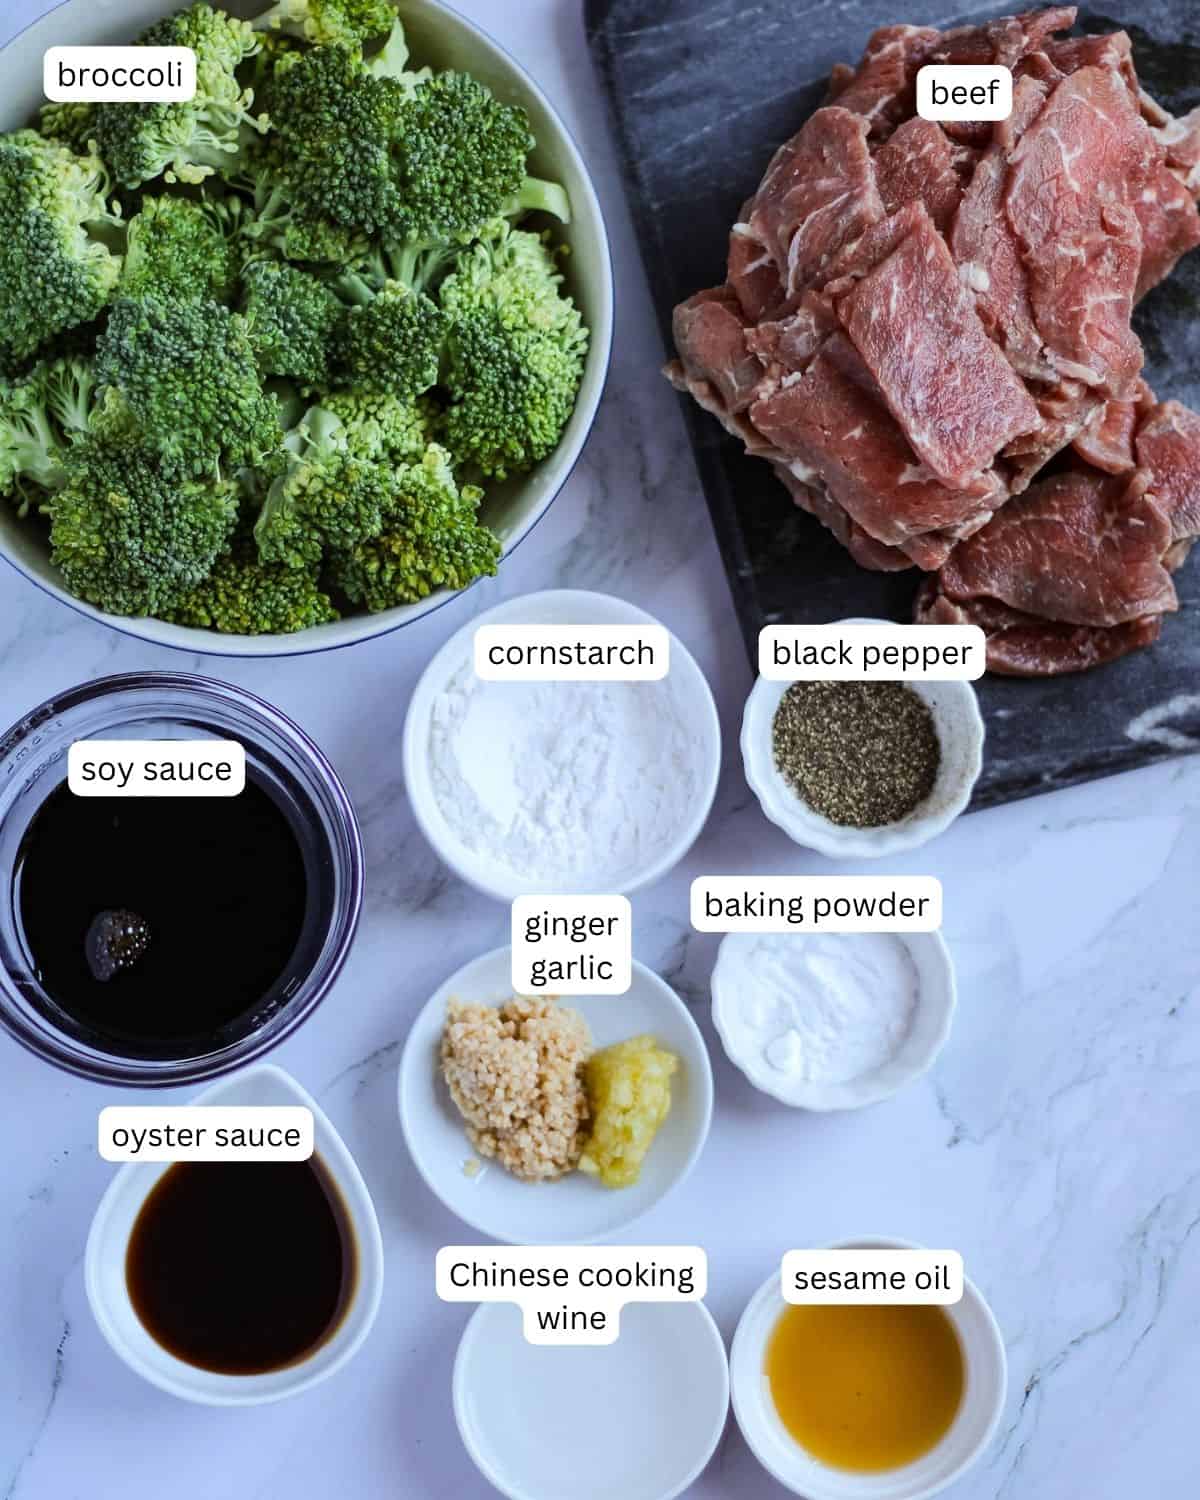 Lists of ingredients for the beef and broccoli panda express.